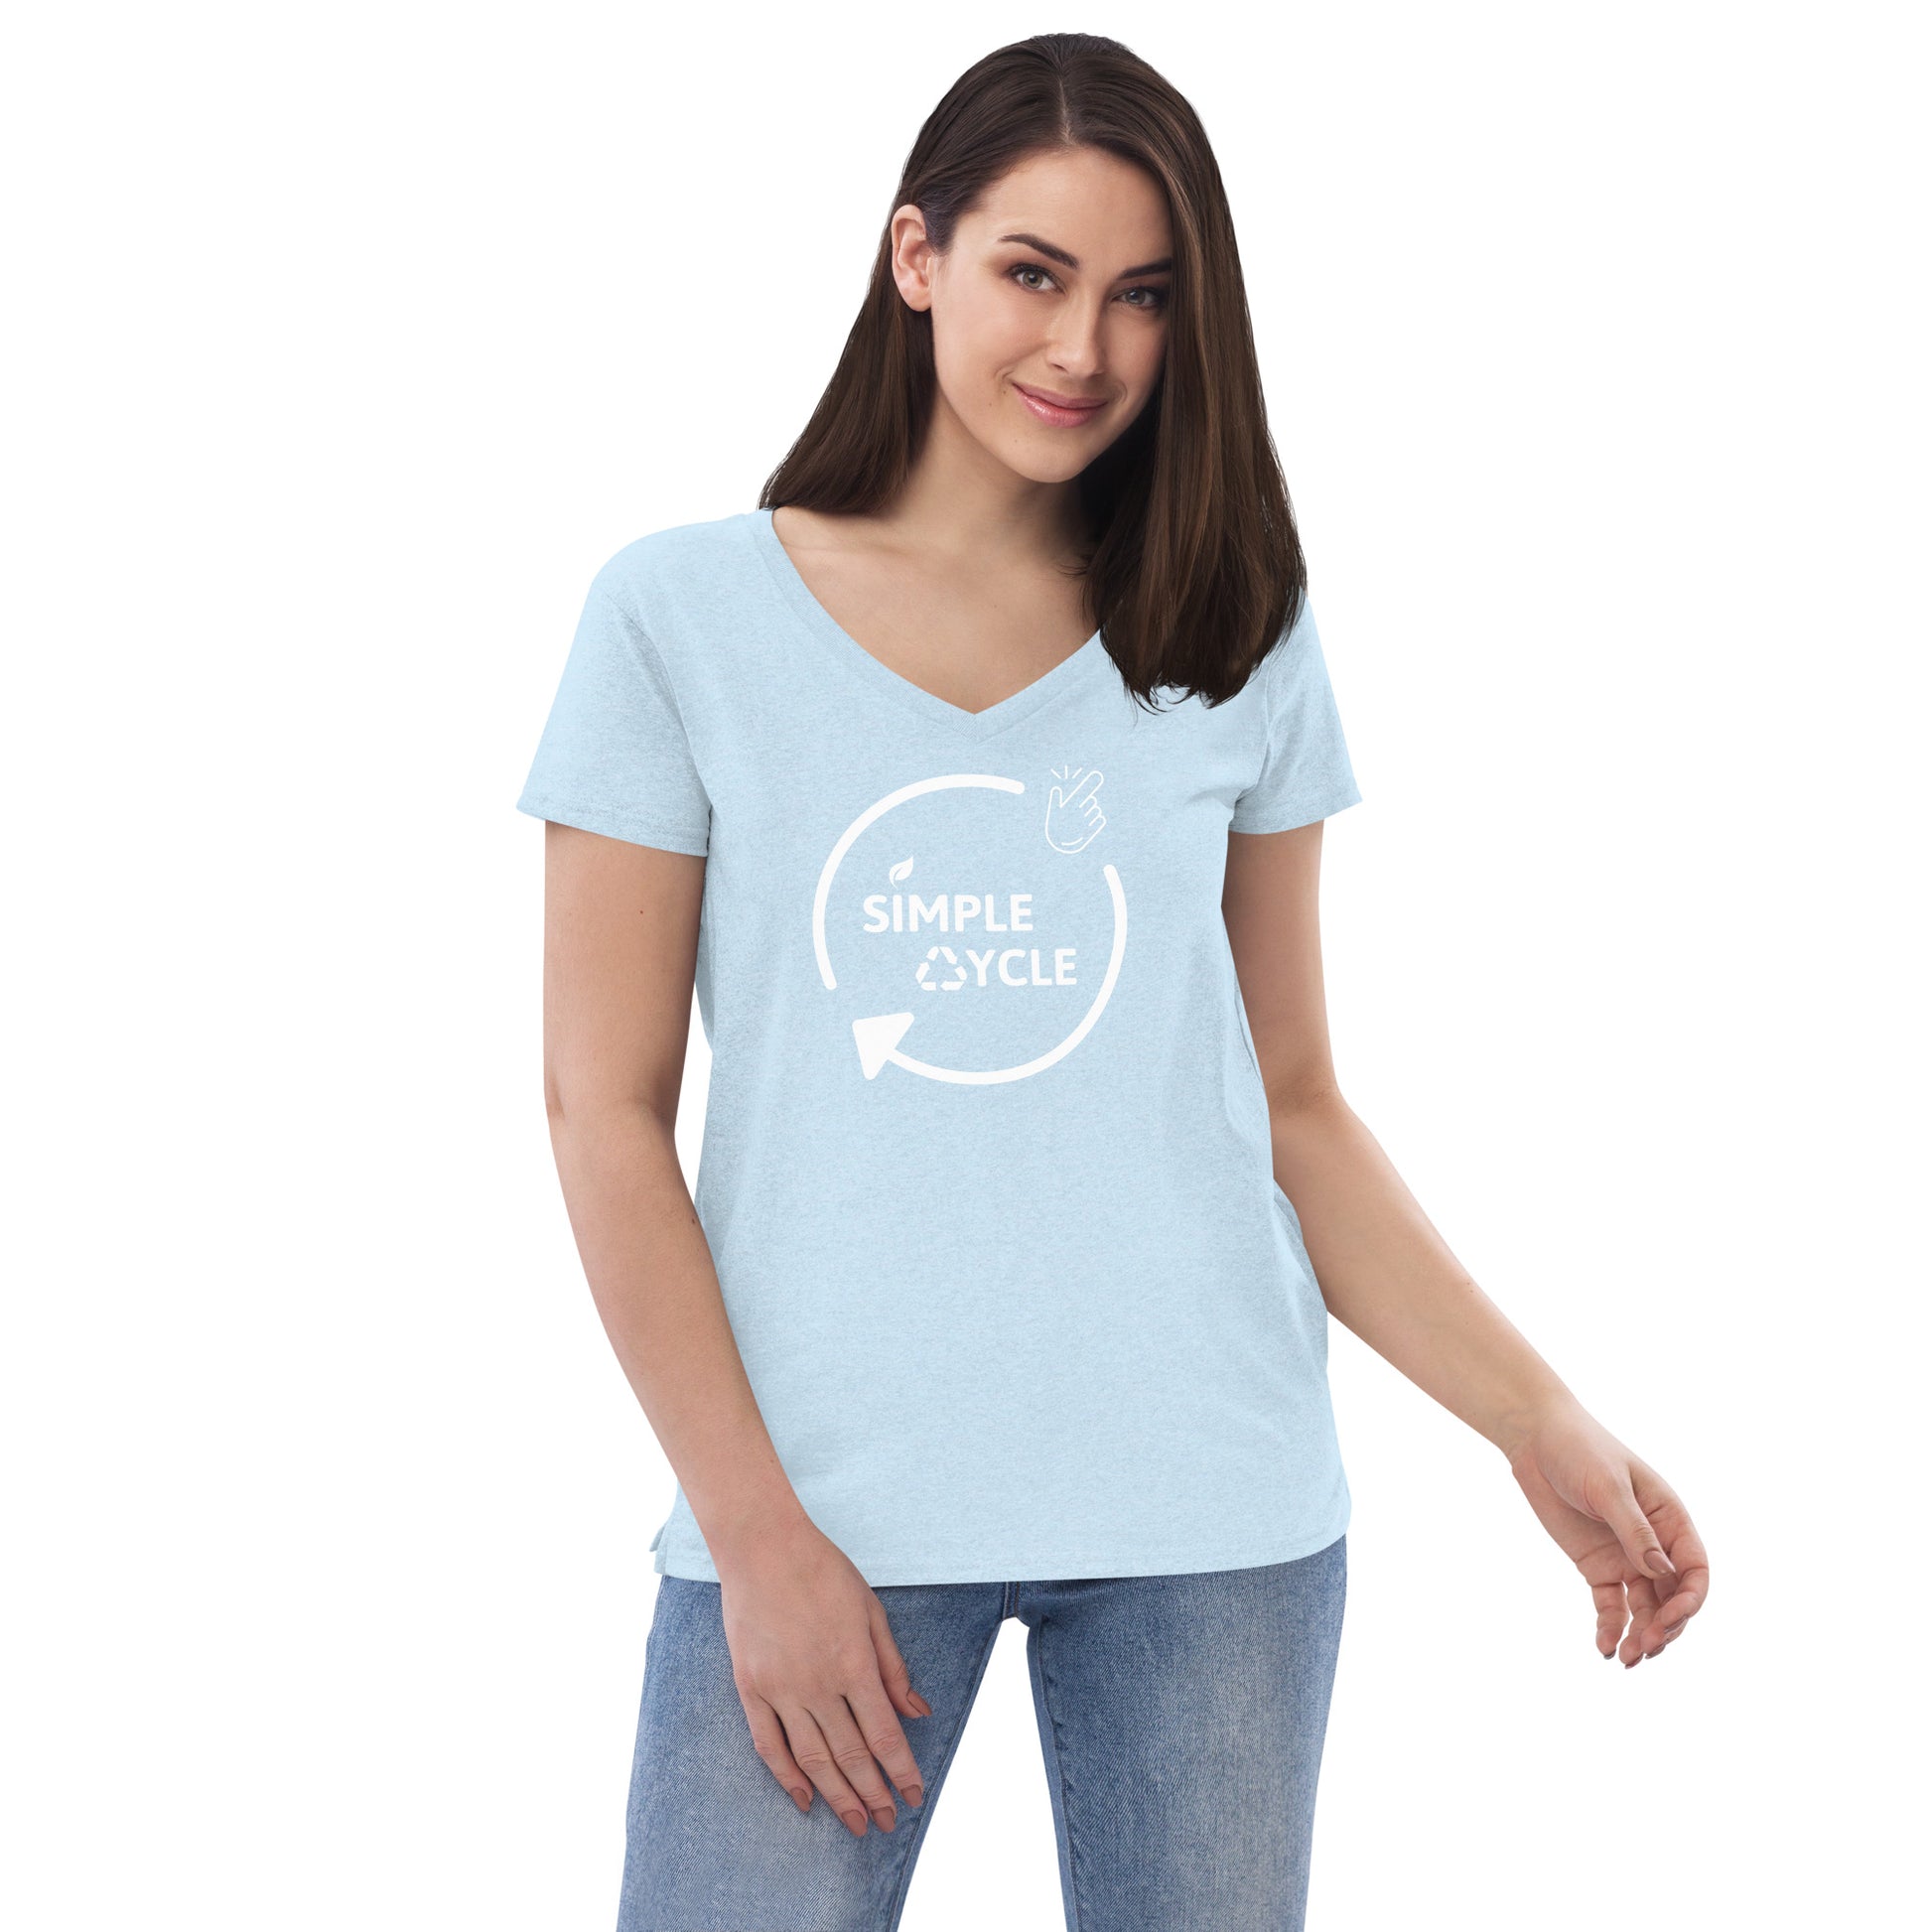 SimpleCycle Women’s Recycled V-Neck T-Shirt crystal blue front